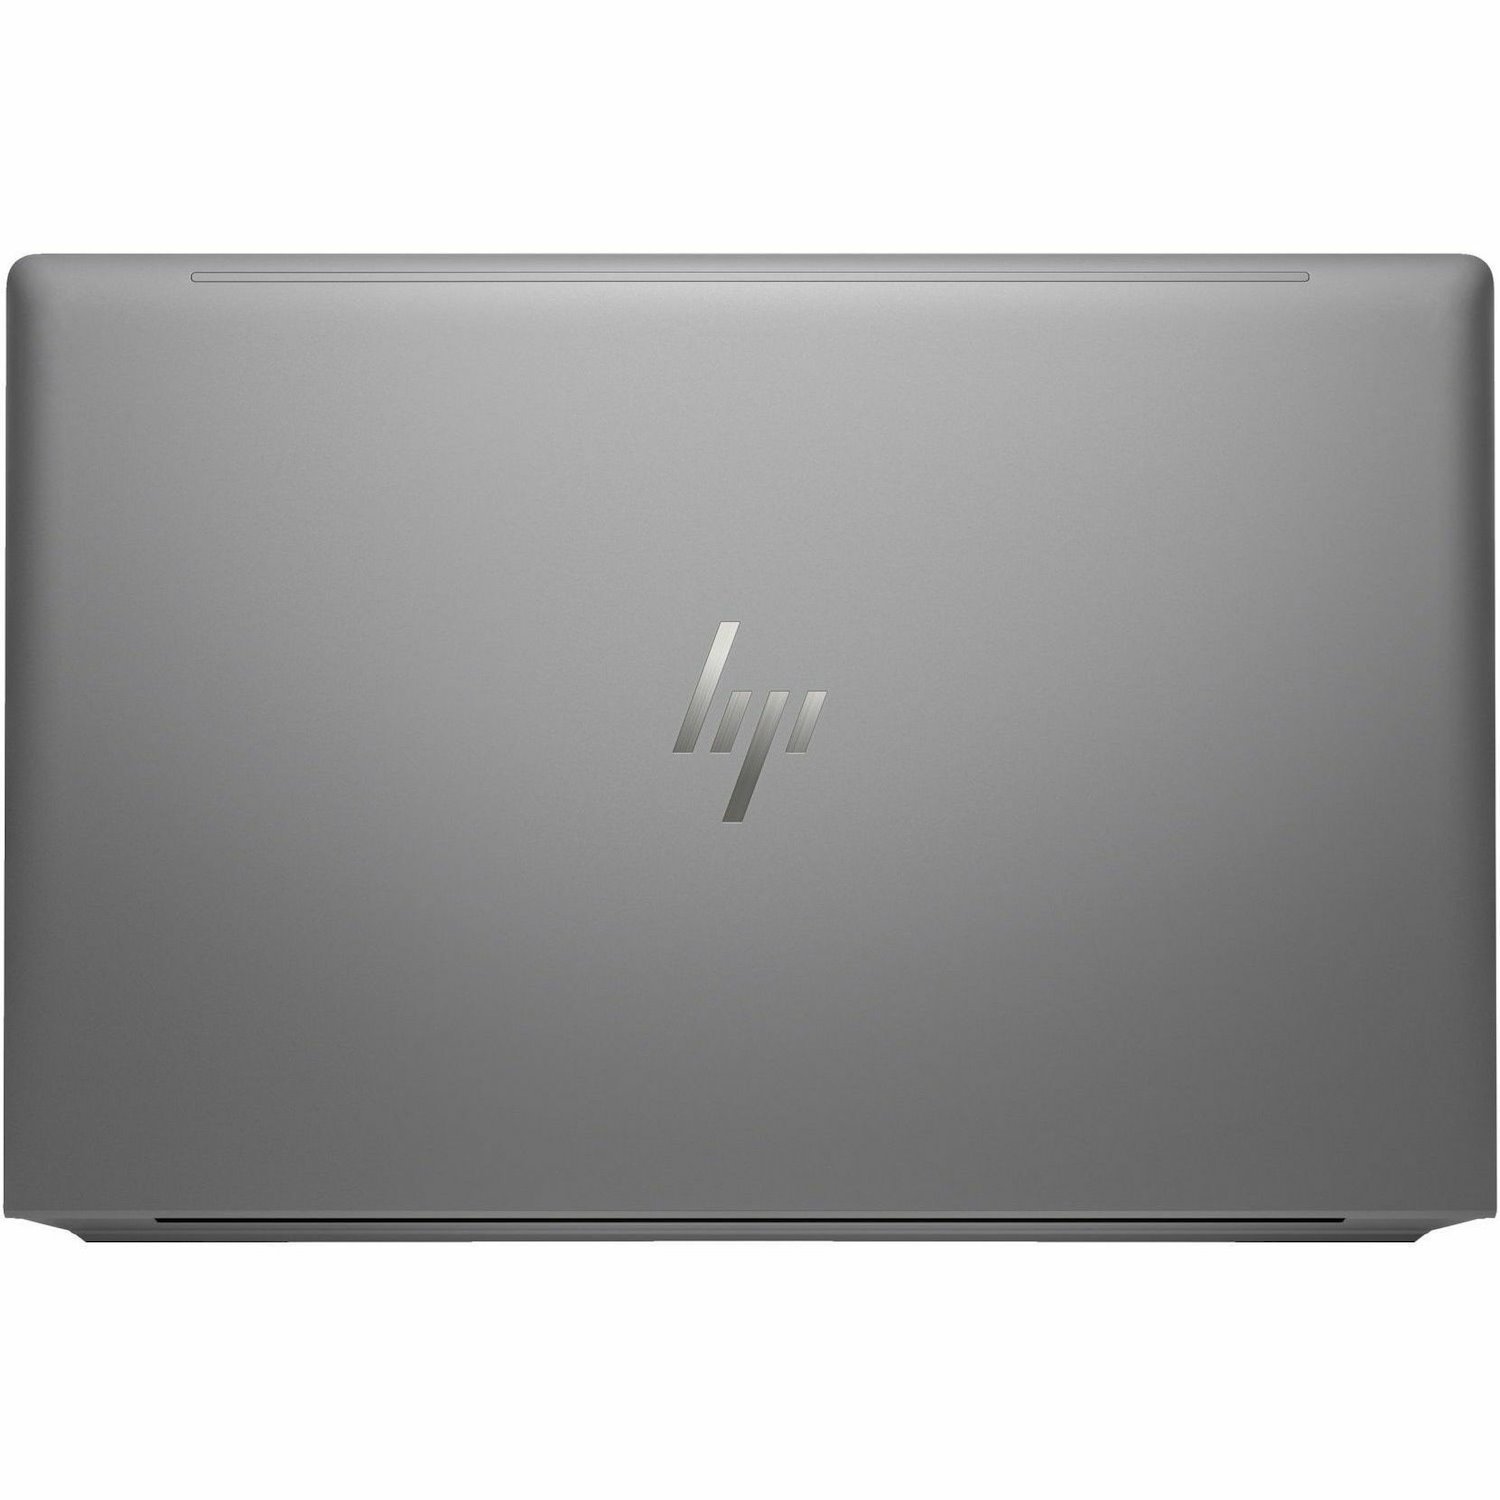 HP ZBook Power G10 15.6" Mobile Workstation - Full HD - Intel Core i7 13th Gen i7-13700H - 16 GB - 512 GB SSD